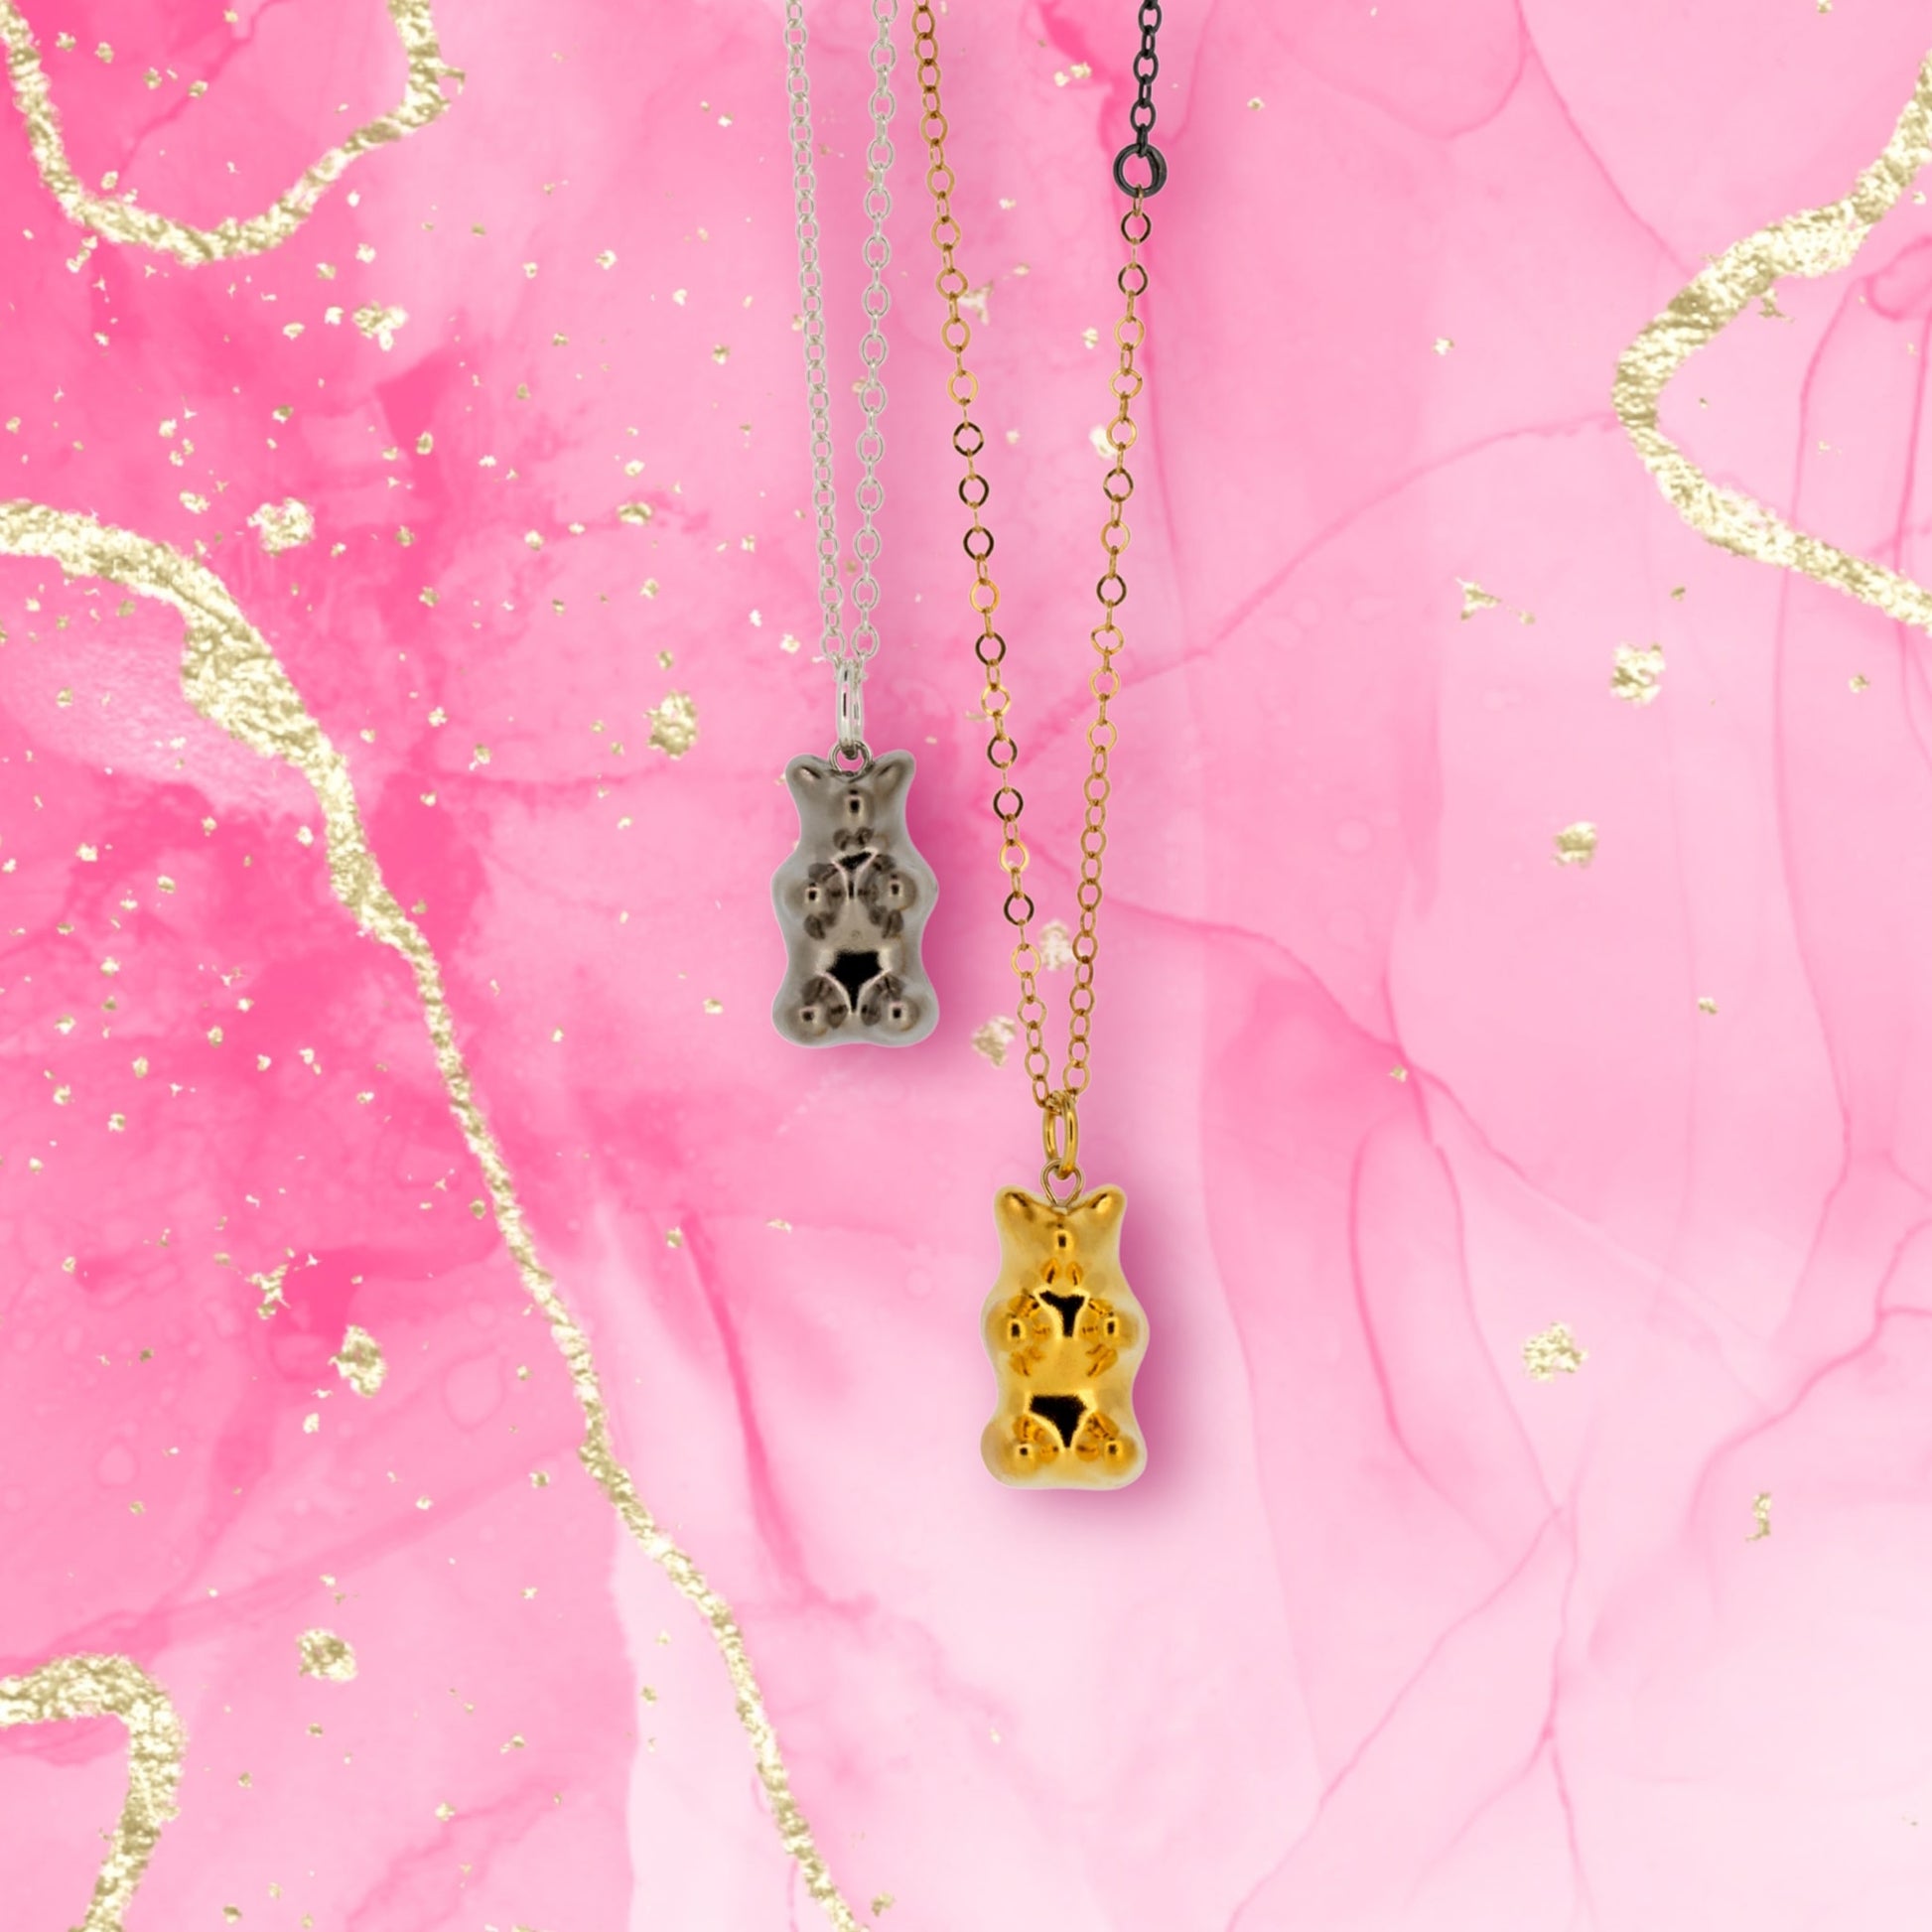 Silver Gummy Bear Necklace and Golden Jelly Jewelry  on pink background